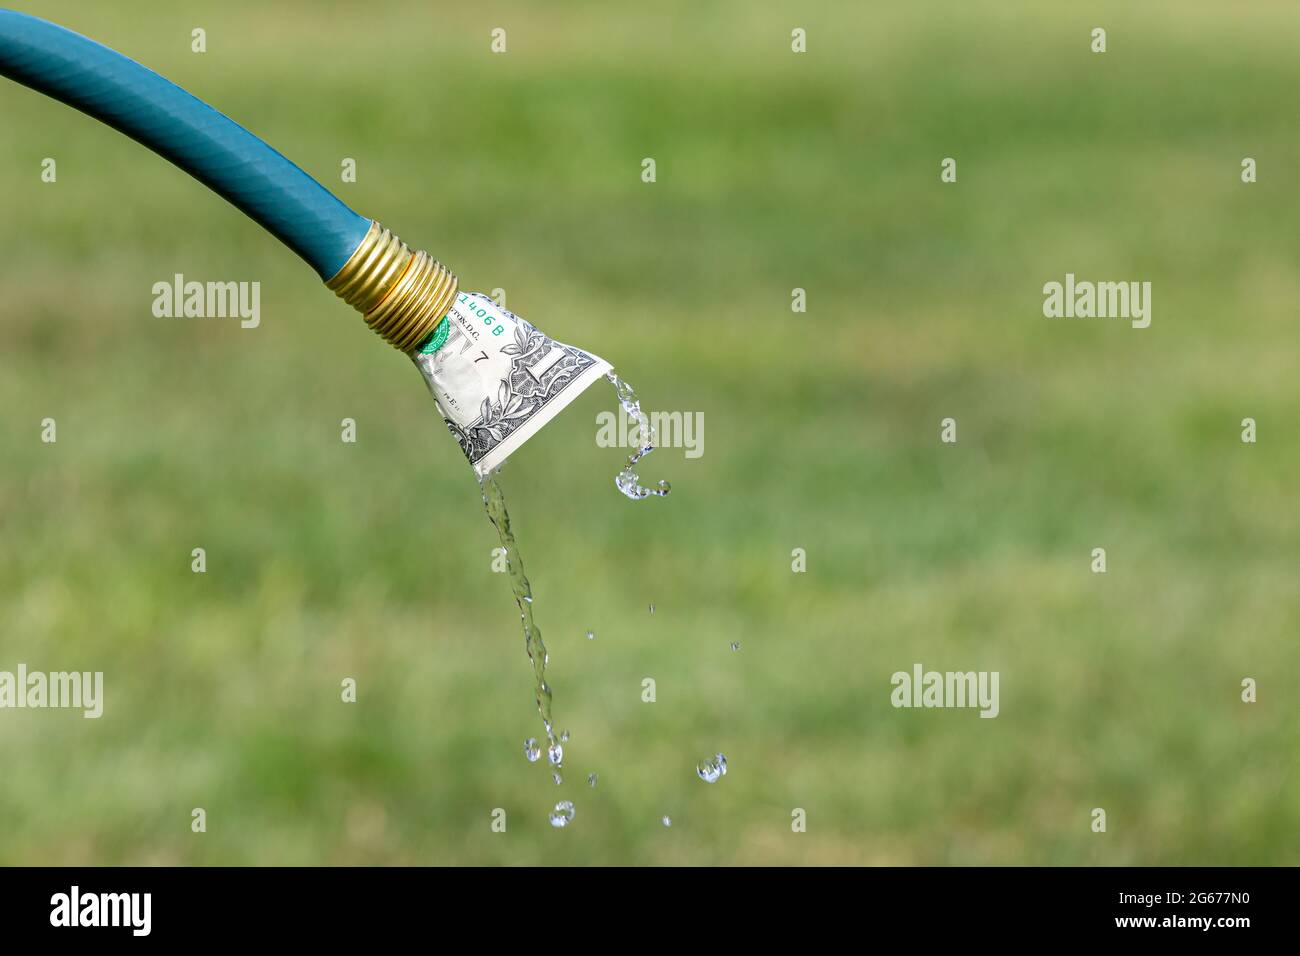 Garden hose and cash money. Water bill, conservation and usage concept Stock Photo